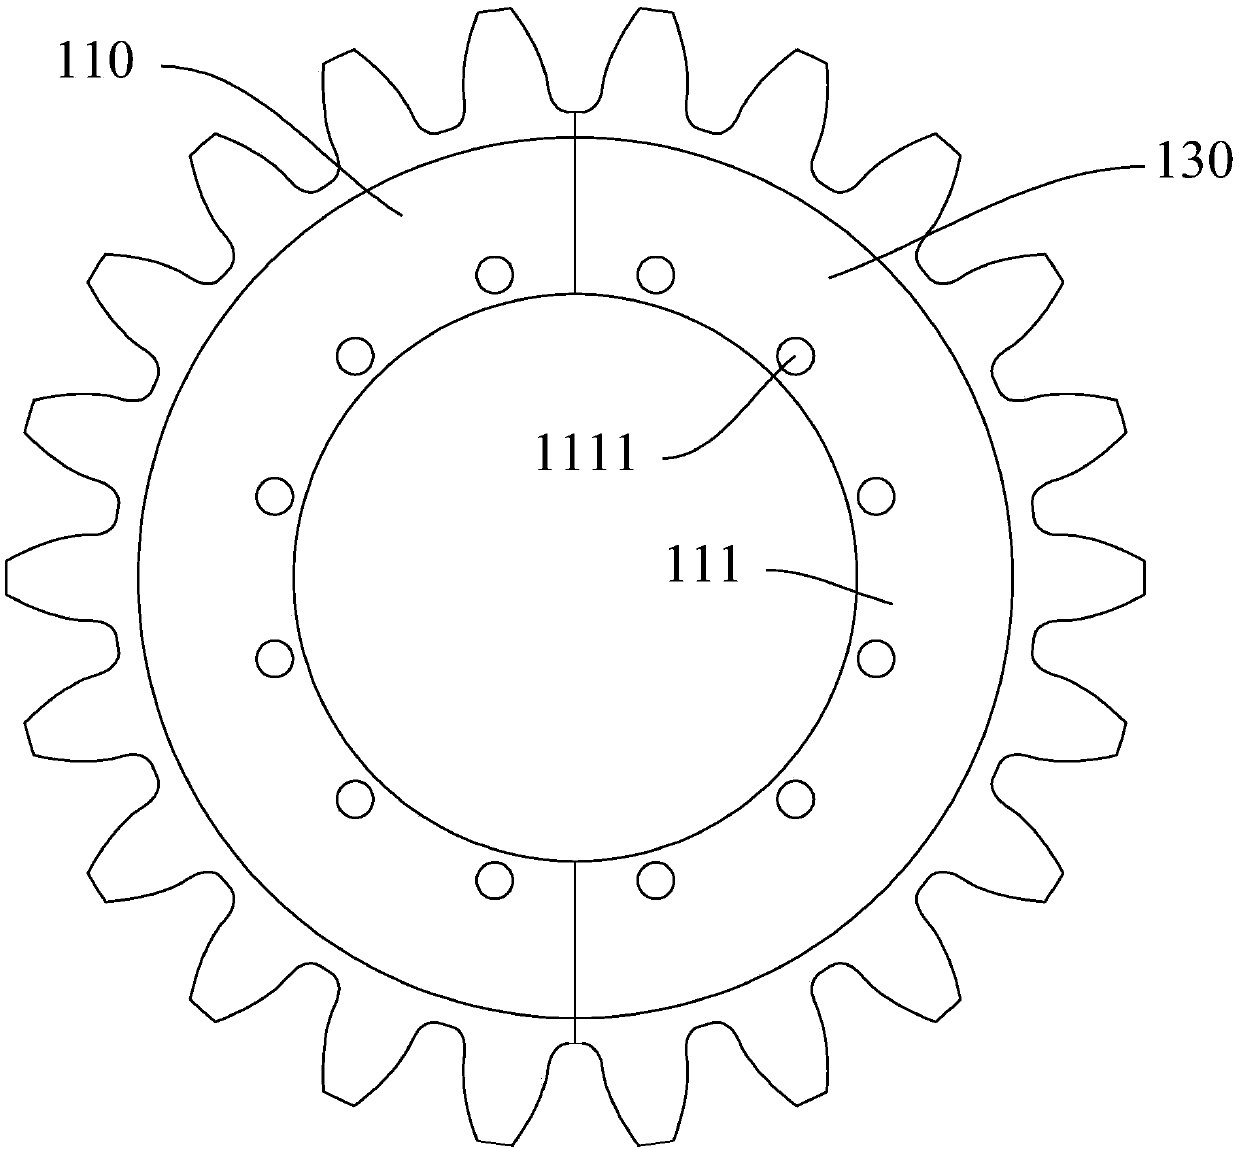 Running gear structure and gear vehicle wheel set